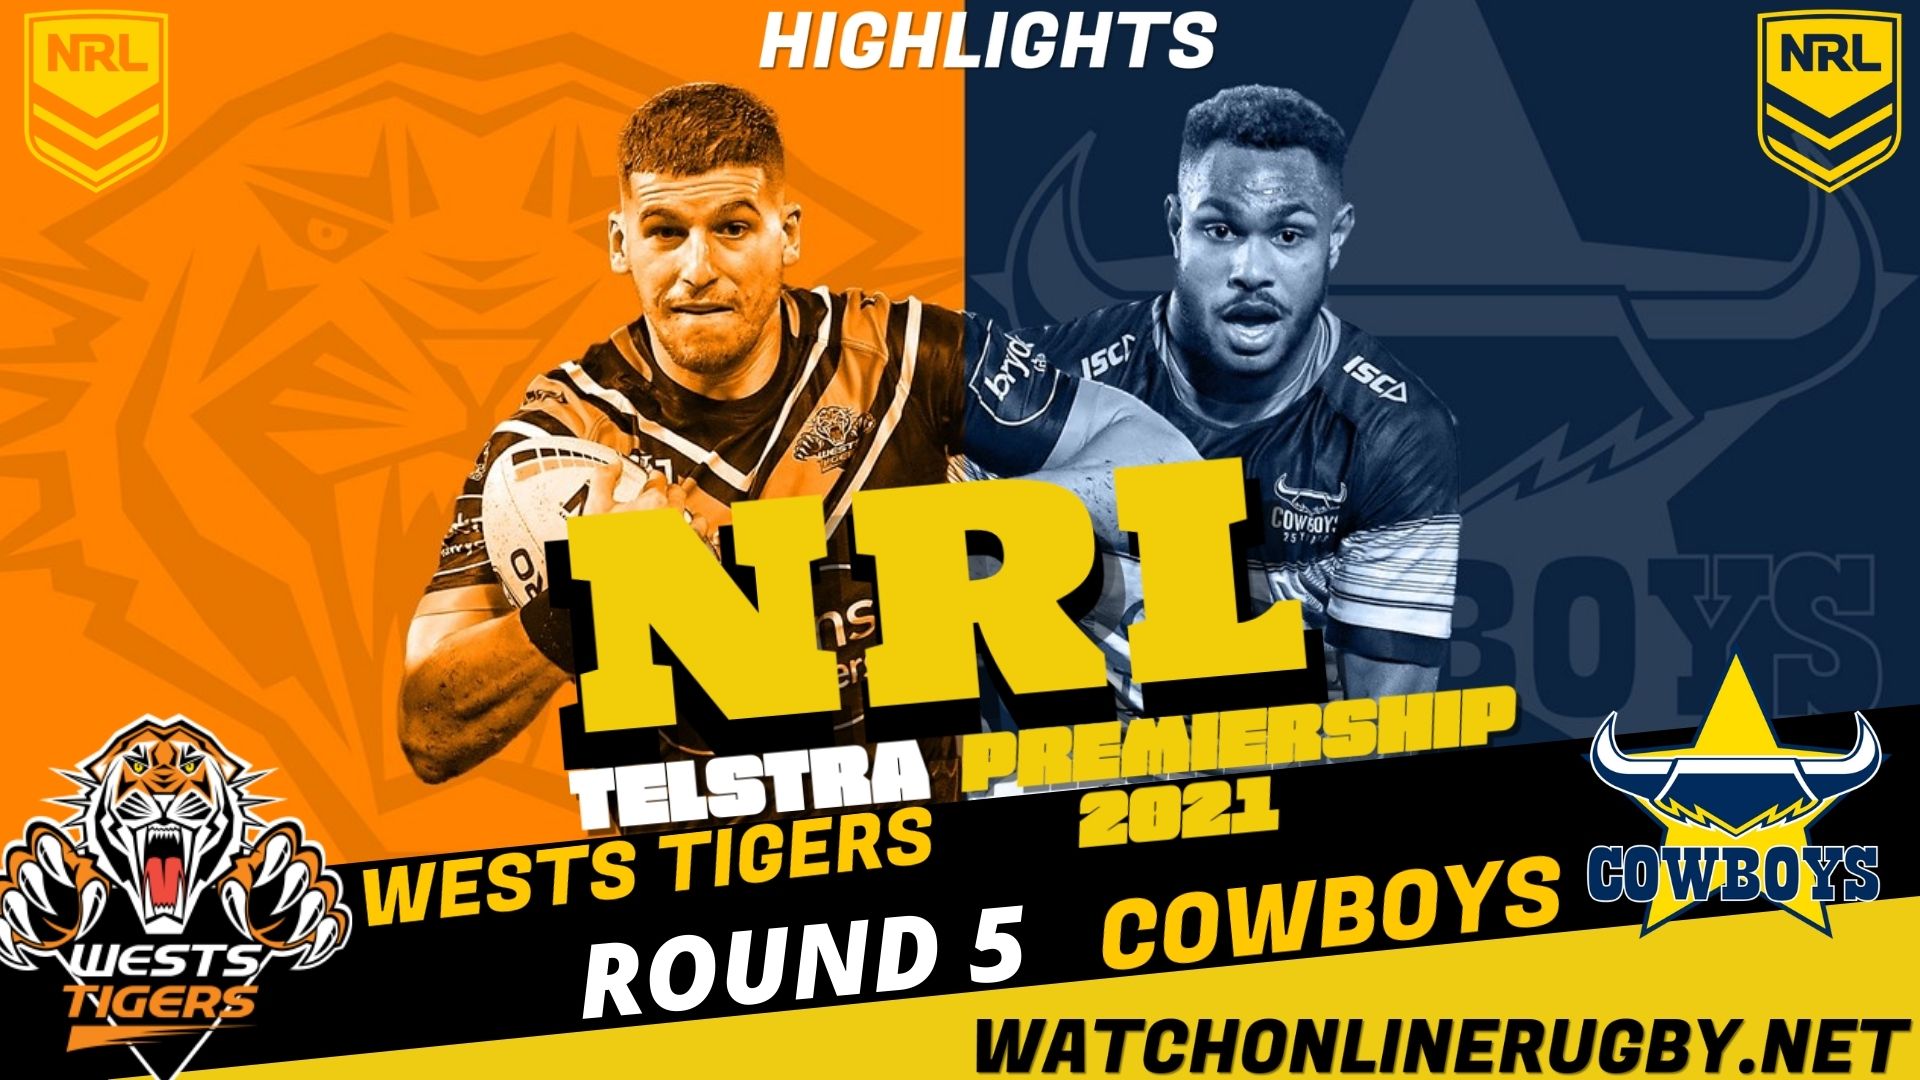 Wests Tigers Vs Cowboys Highlights RD 5 NRL Rugby